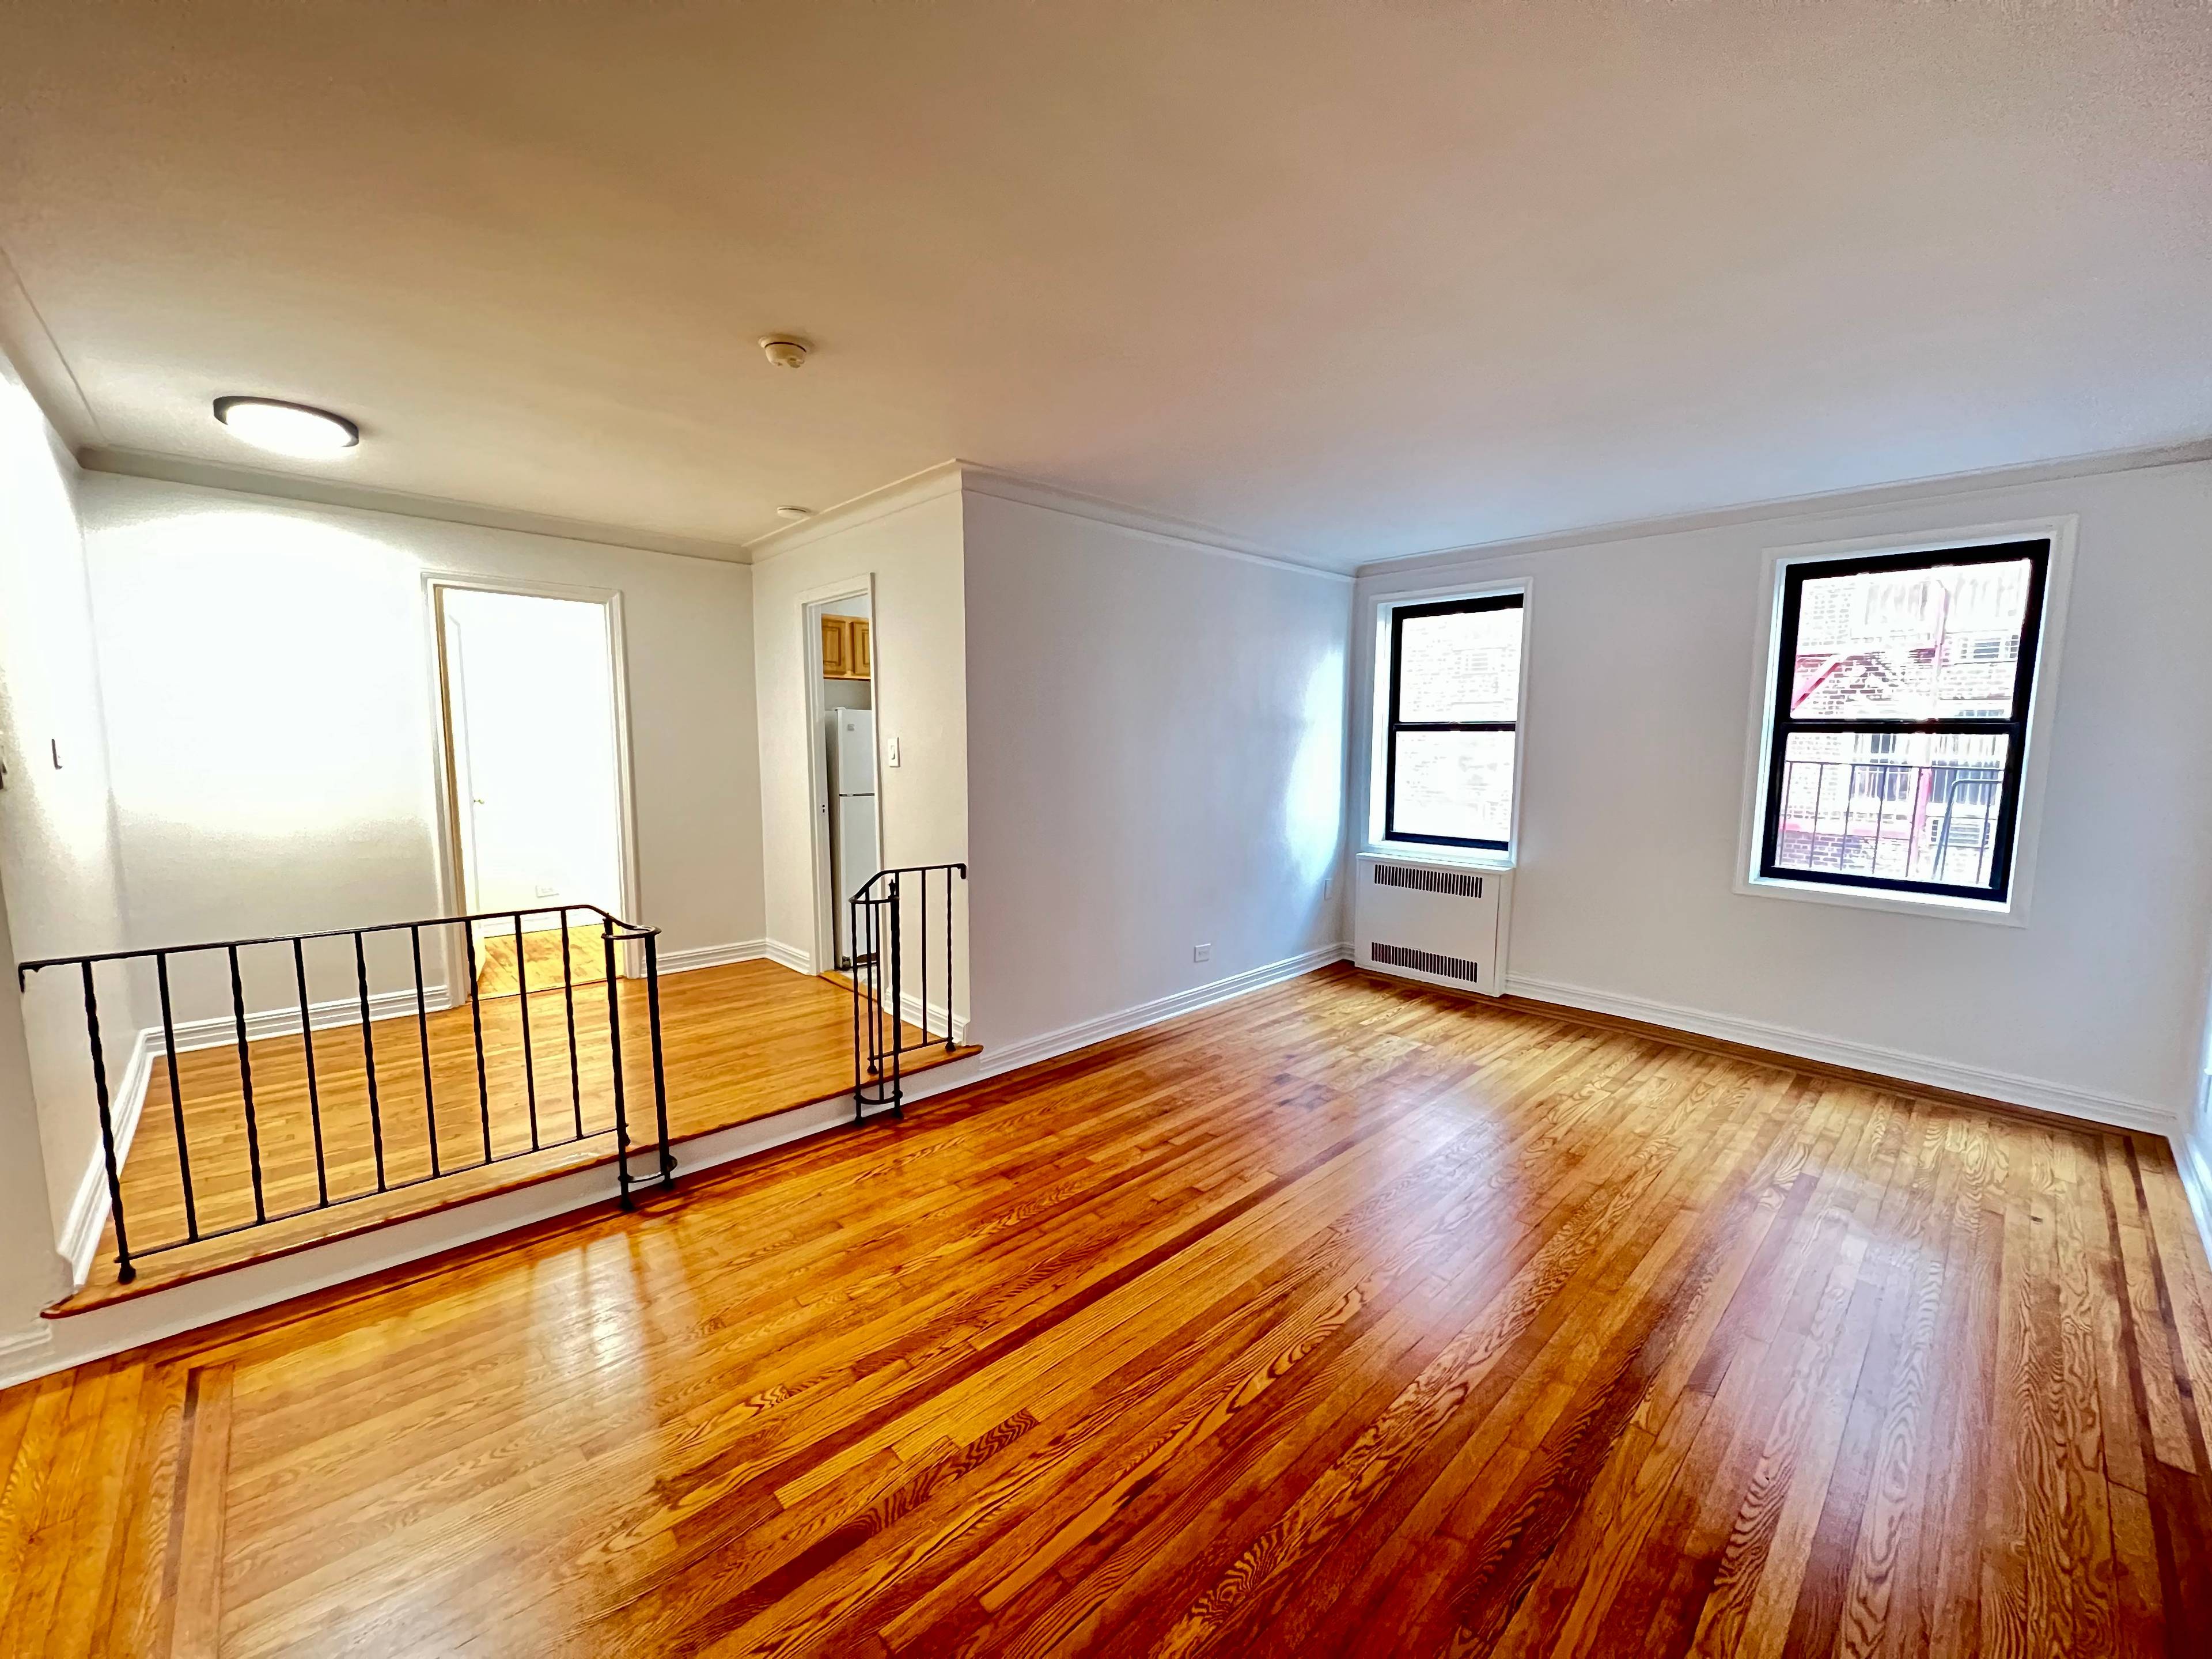 Elmhurst, Queens: Oversized Studio with Home Office Close to 7 Train